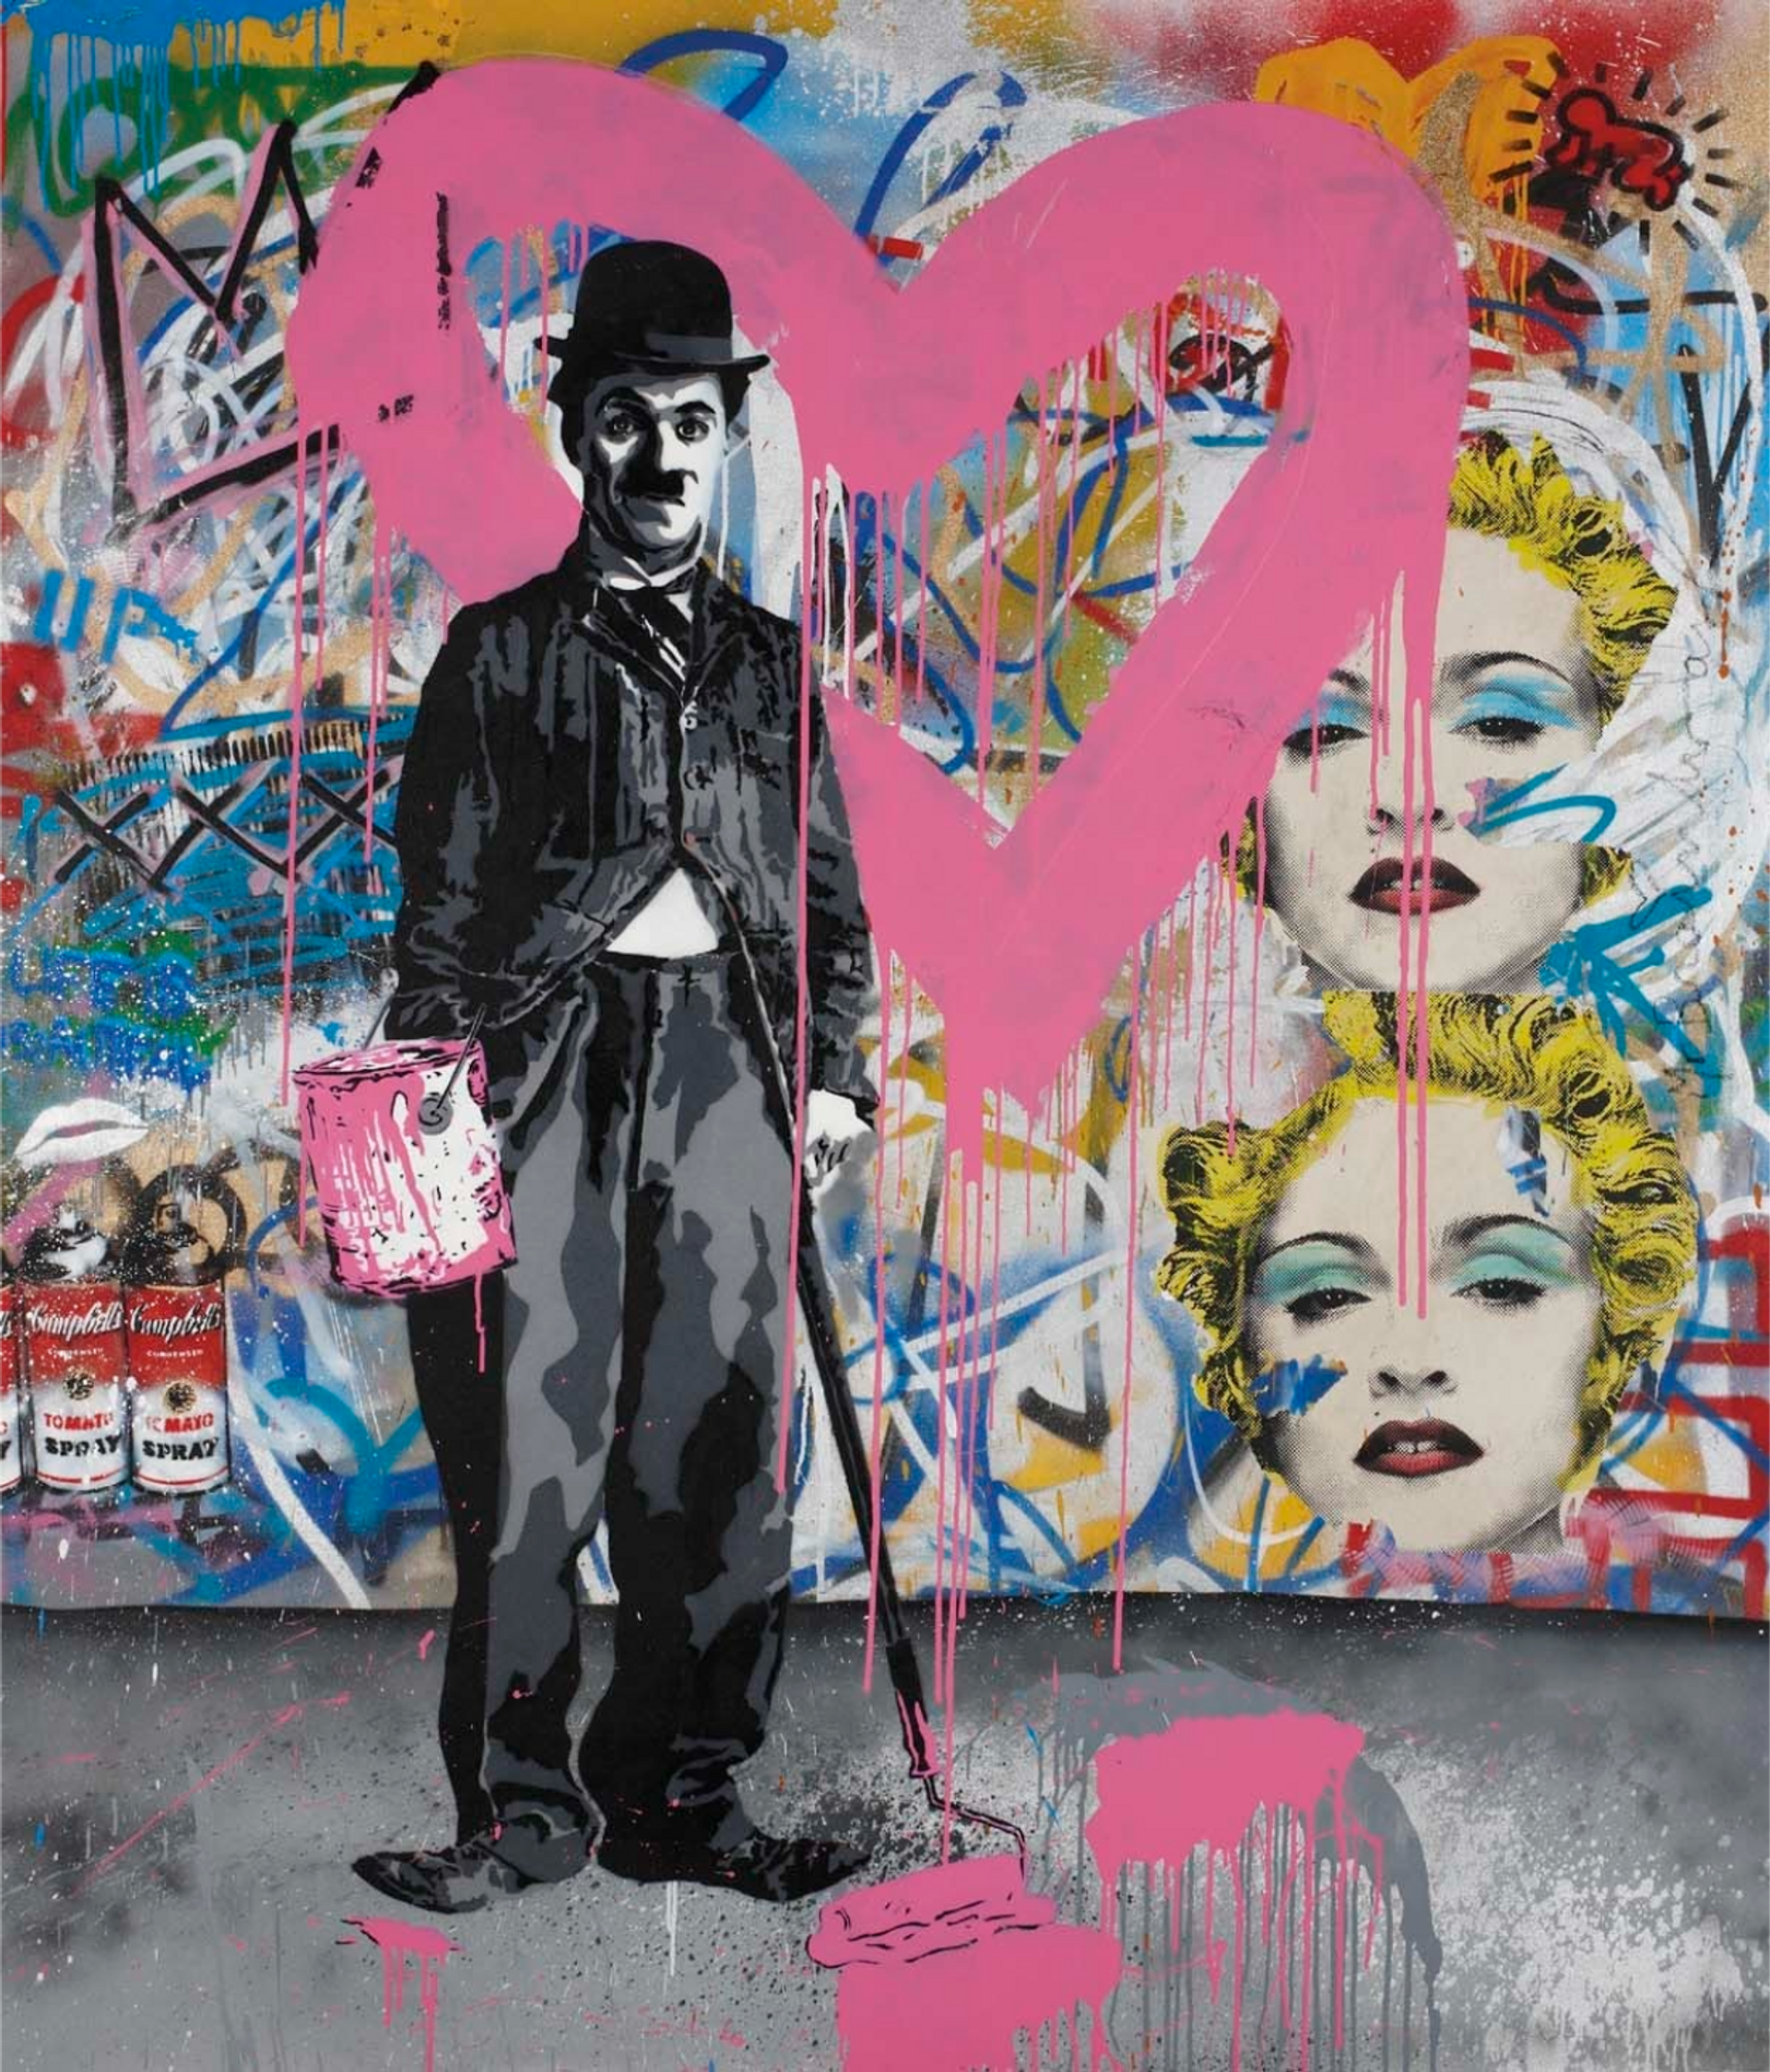 An image of the painting Charlie Chaplin Pink by Mr. Brainwash, showing a monochrome version of the actor Charlie Chaplin holding a paint bucket and roller. He is in direct contrast against the colourful background, which has images of singer Madonna, Andy Warhol’s Campbell’s Soups and Basquiat’s crowns.